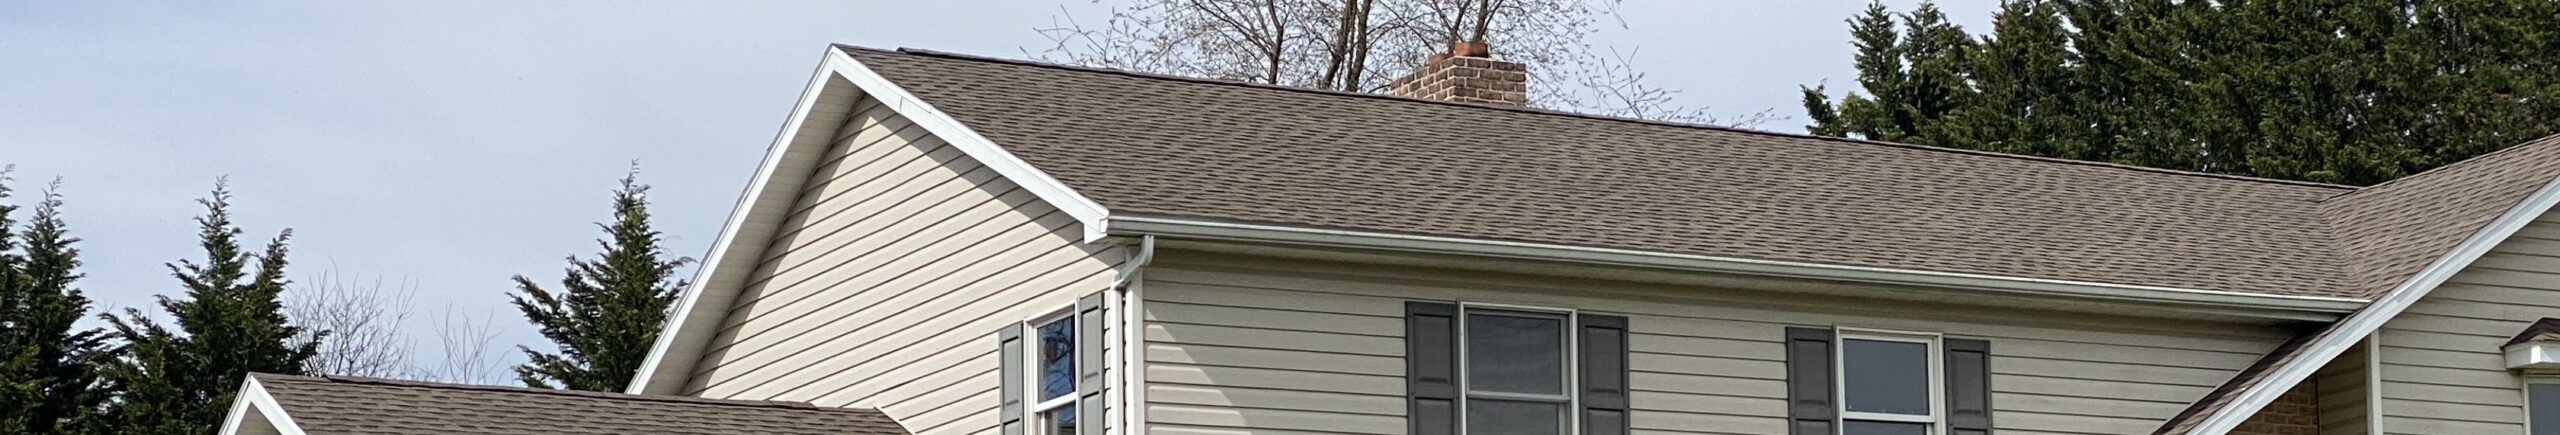 New Roof, Roof Replacement and Re-Roofing